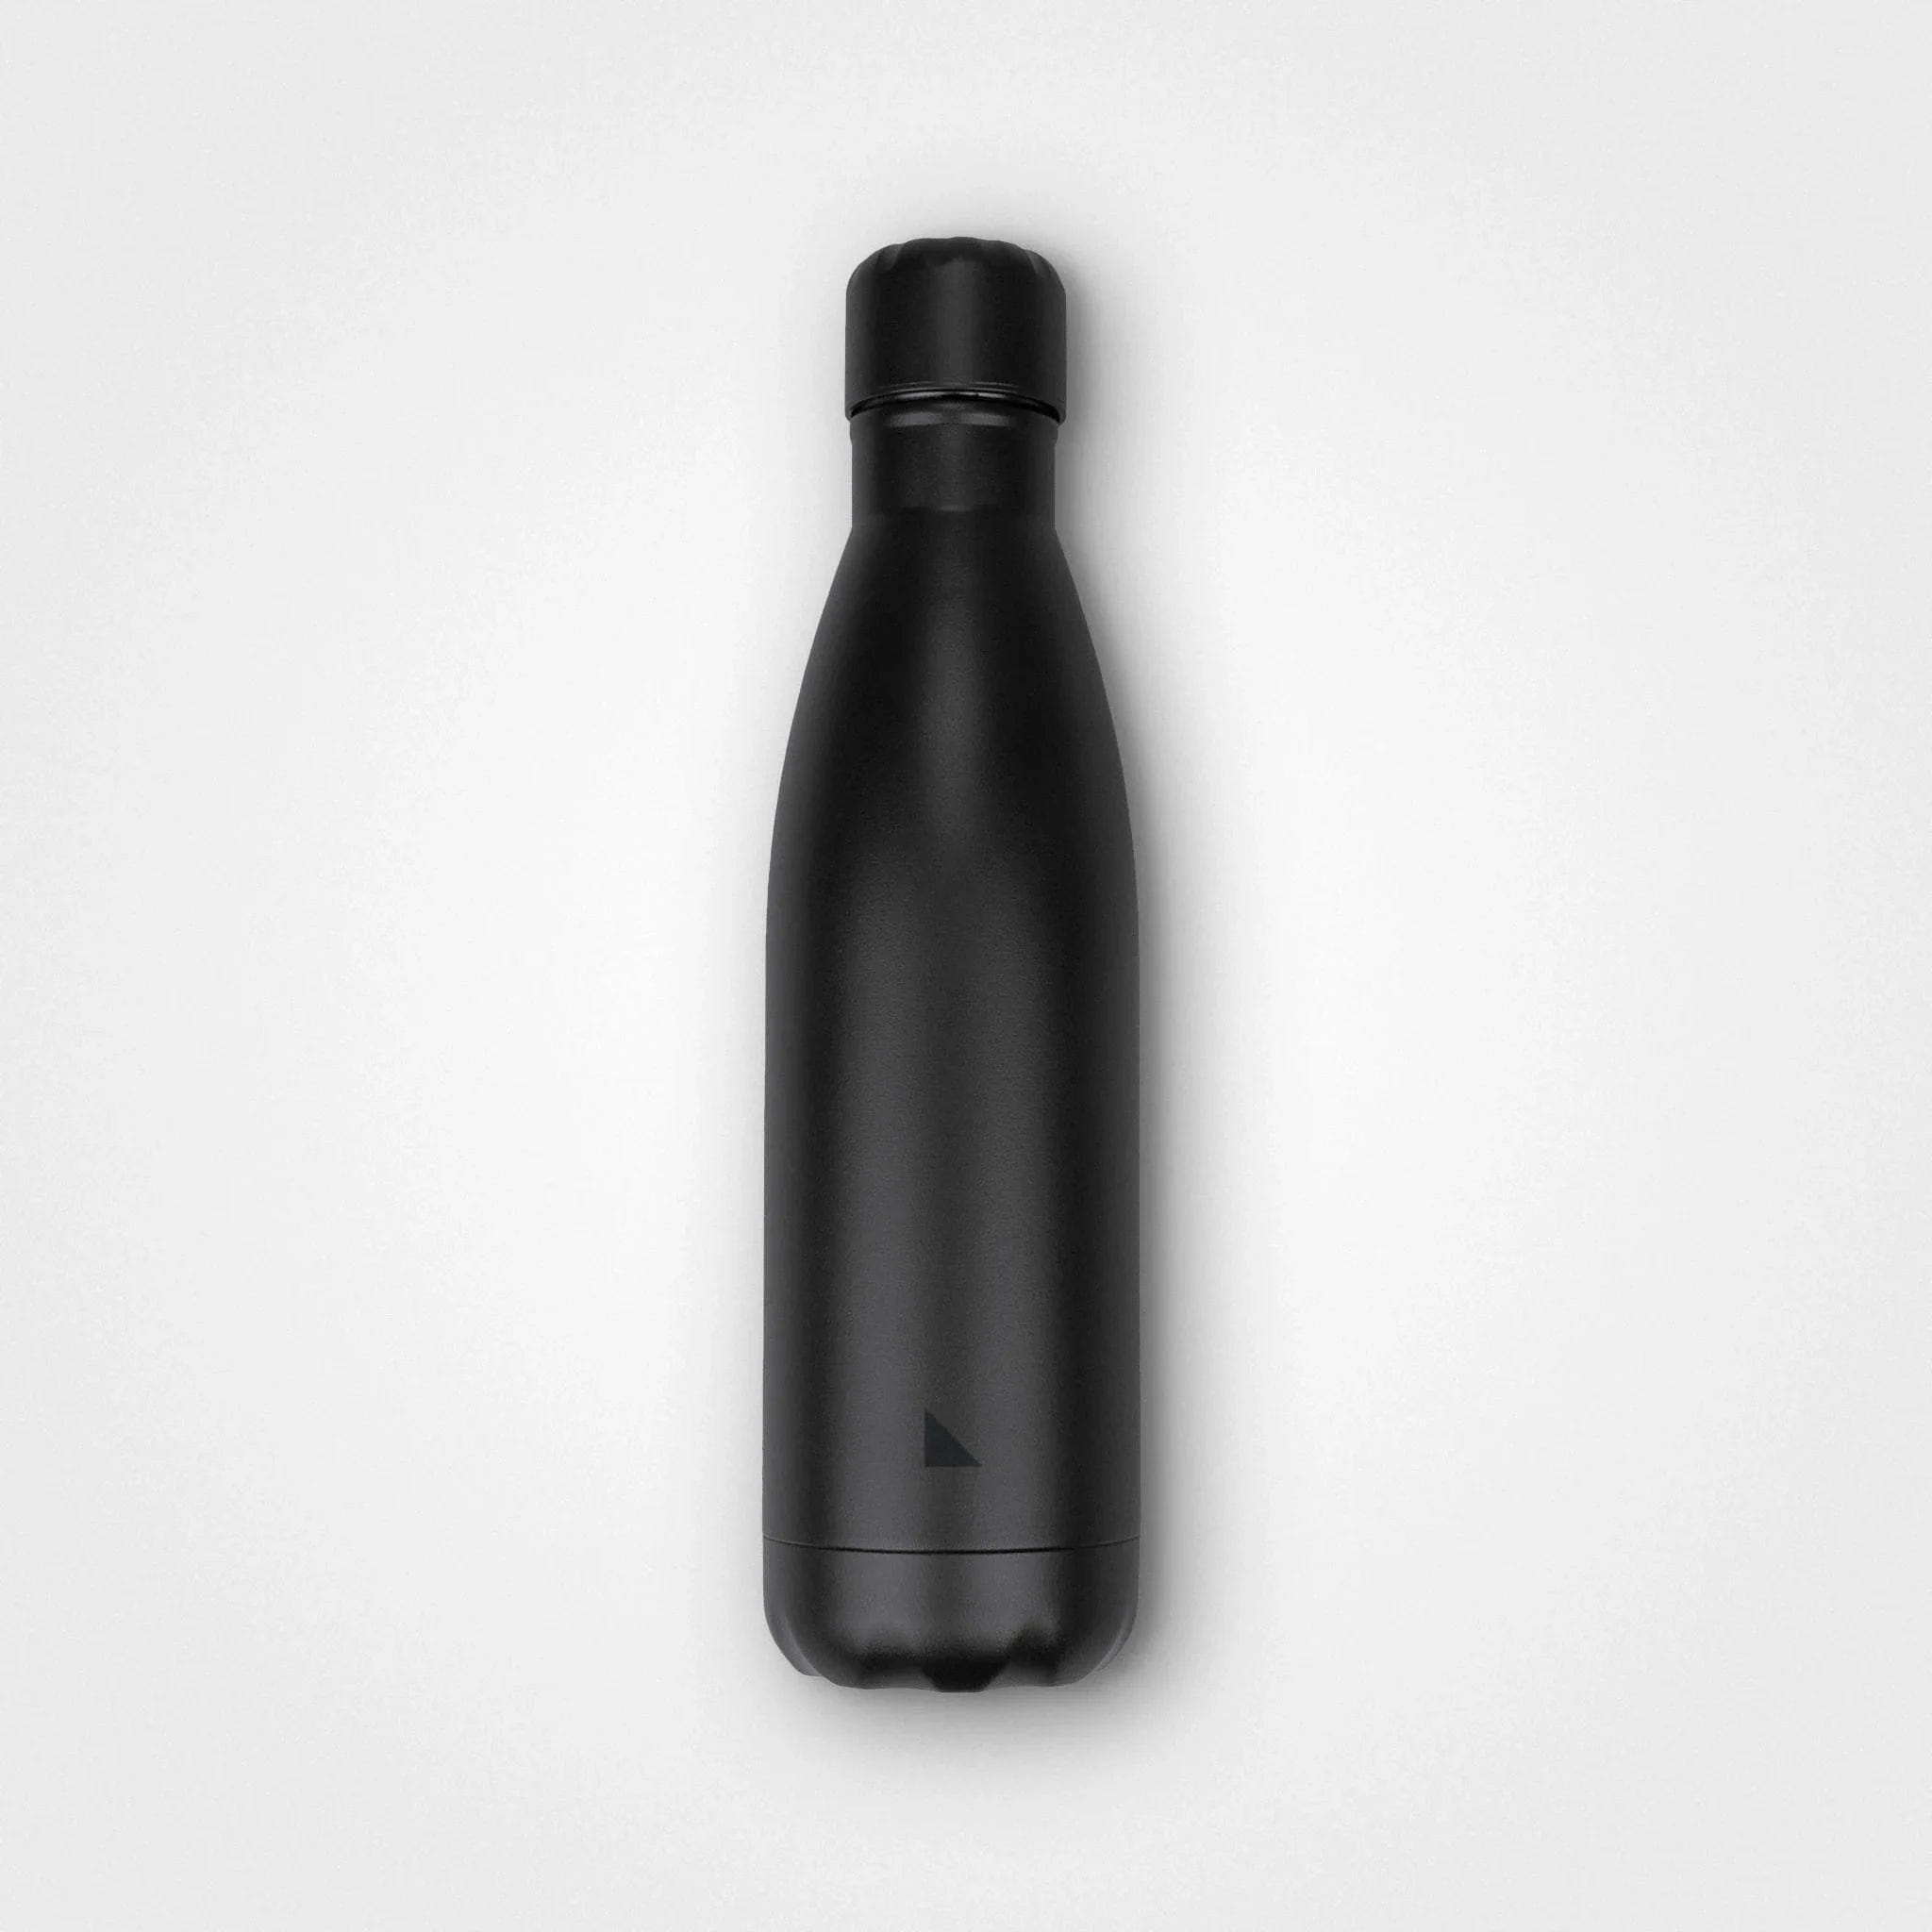 Buy Wholesale China Simple Modern Insulated Water Bottle With